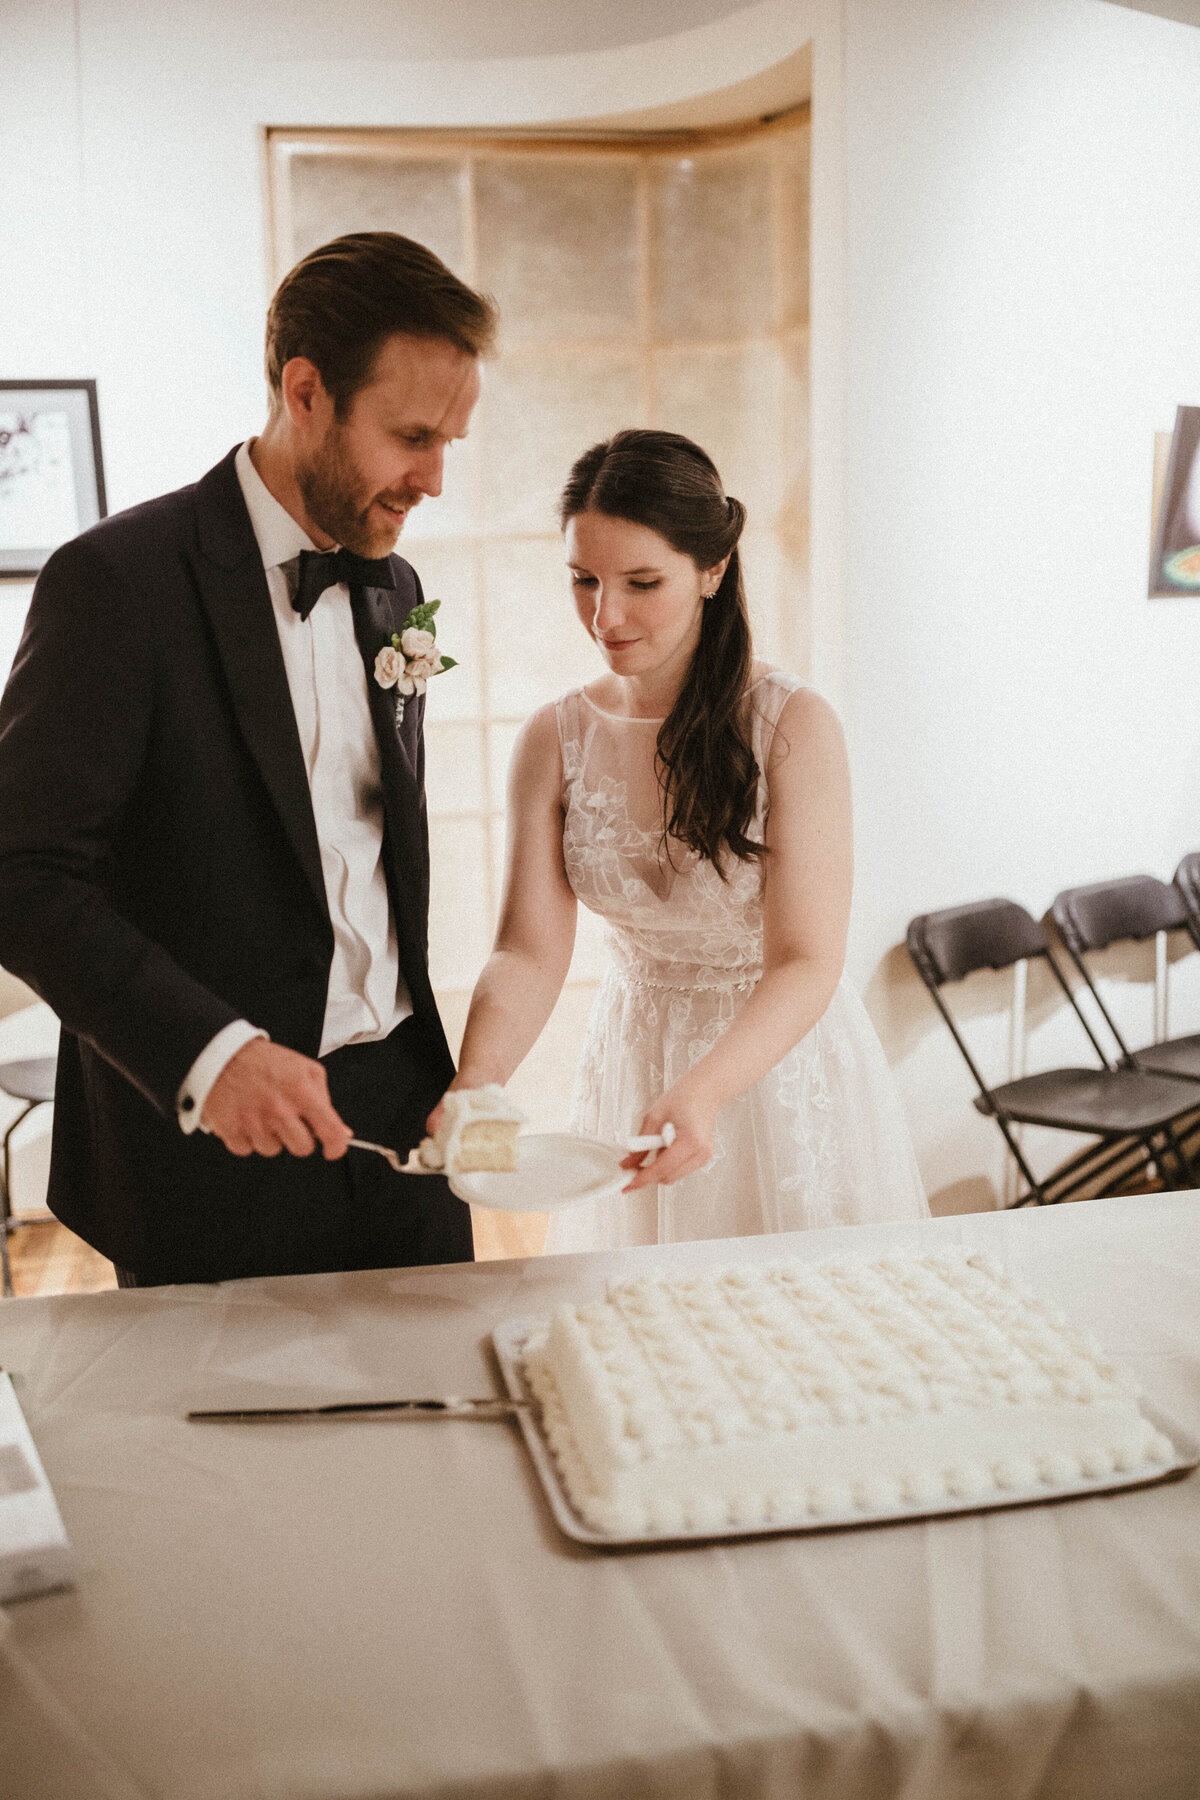 bride-and-groom-cutting-cake